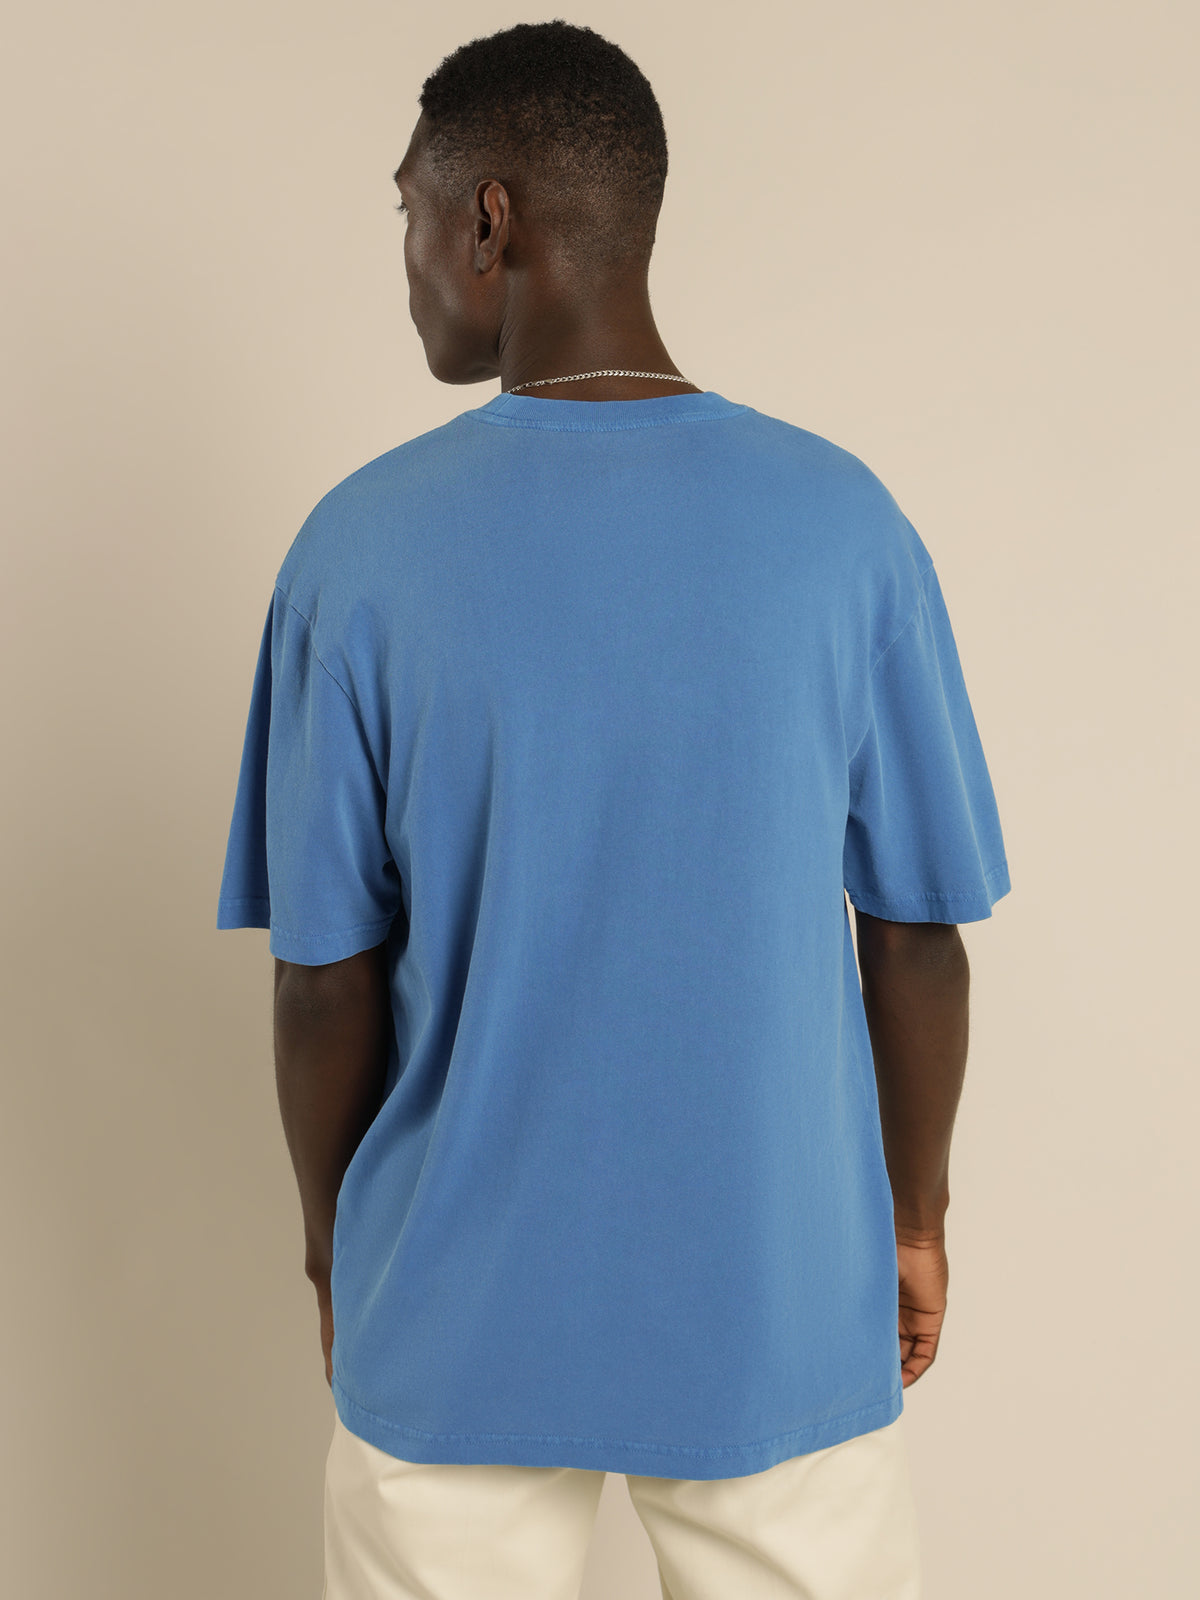 Incline Stack T-Shirt Magic in Faded Royal